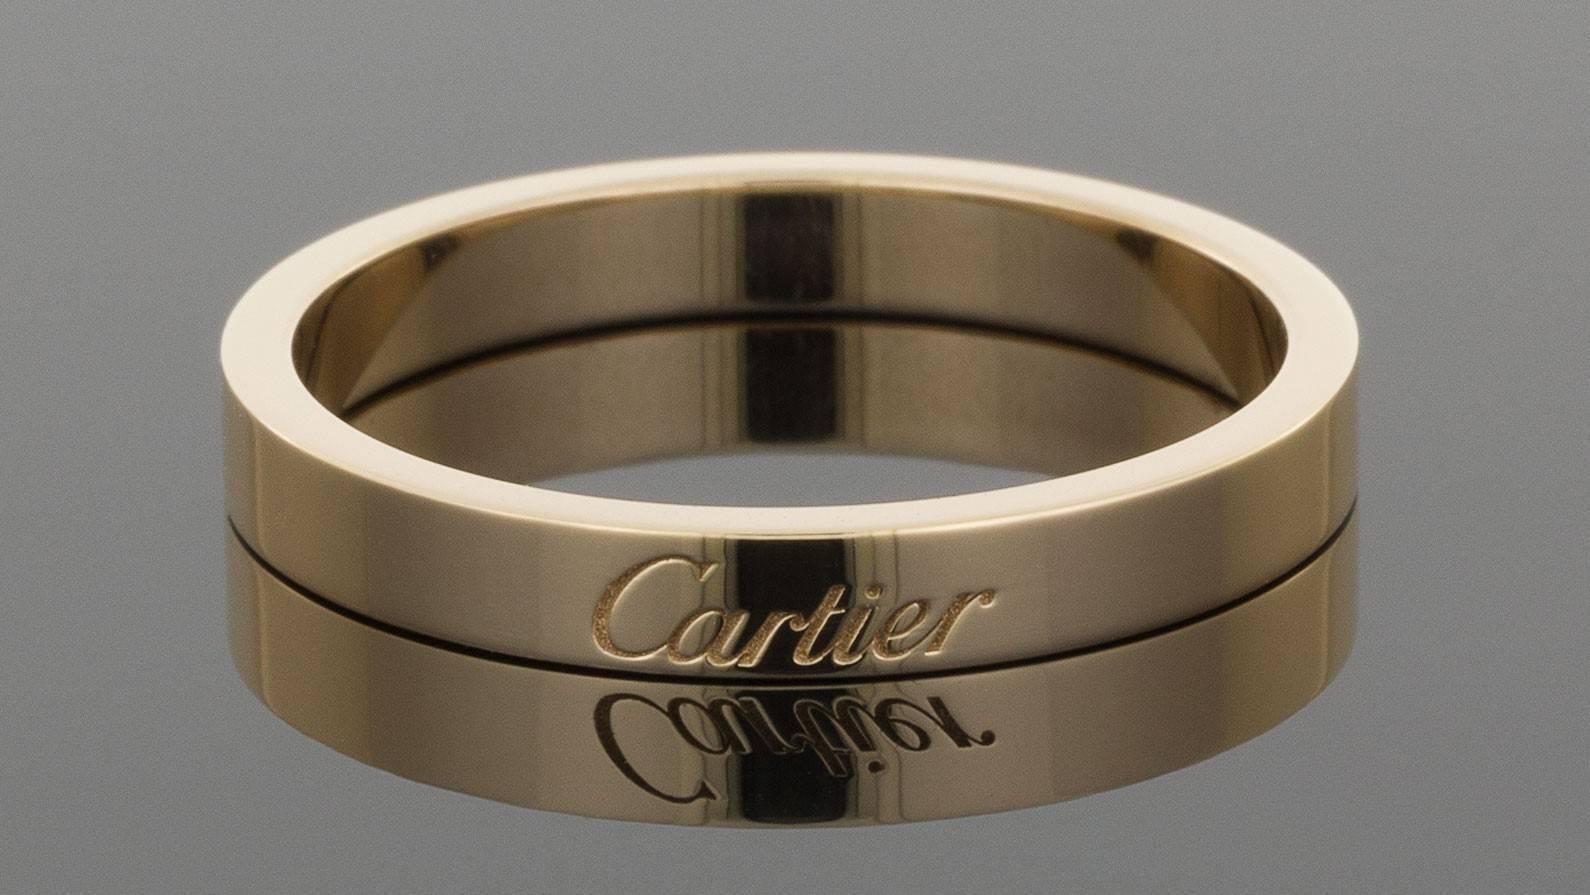 Cartier had its beginning in Paris in 1847 & has grown into a name that is instantly recognizable the world over. This beautiful Cartier wedding band is comprised of 18 karat pink gold & measures approximately 3 millimeters in width. The ring